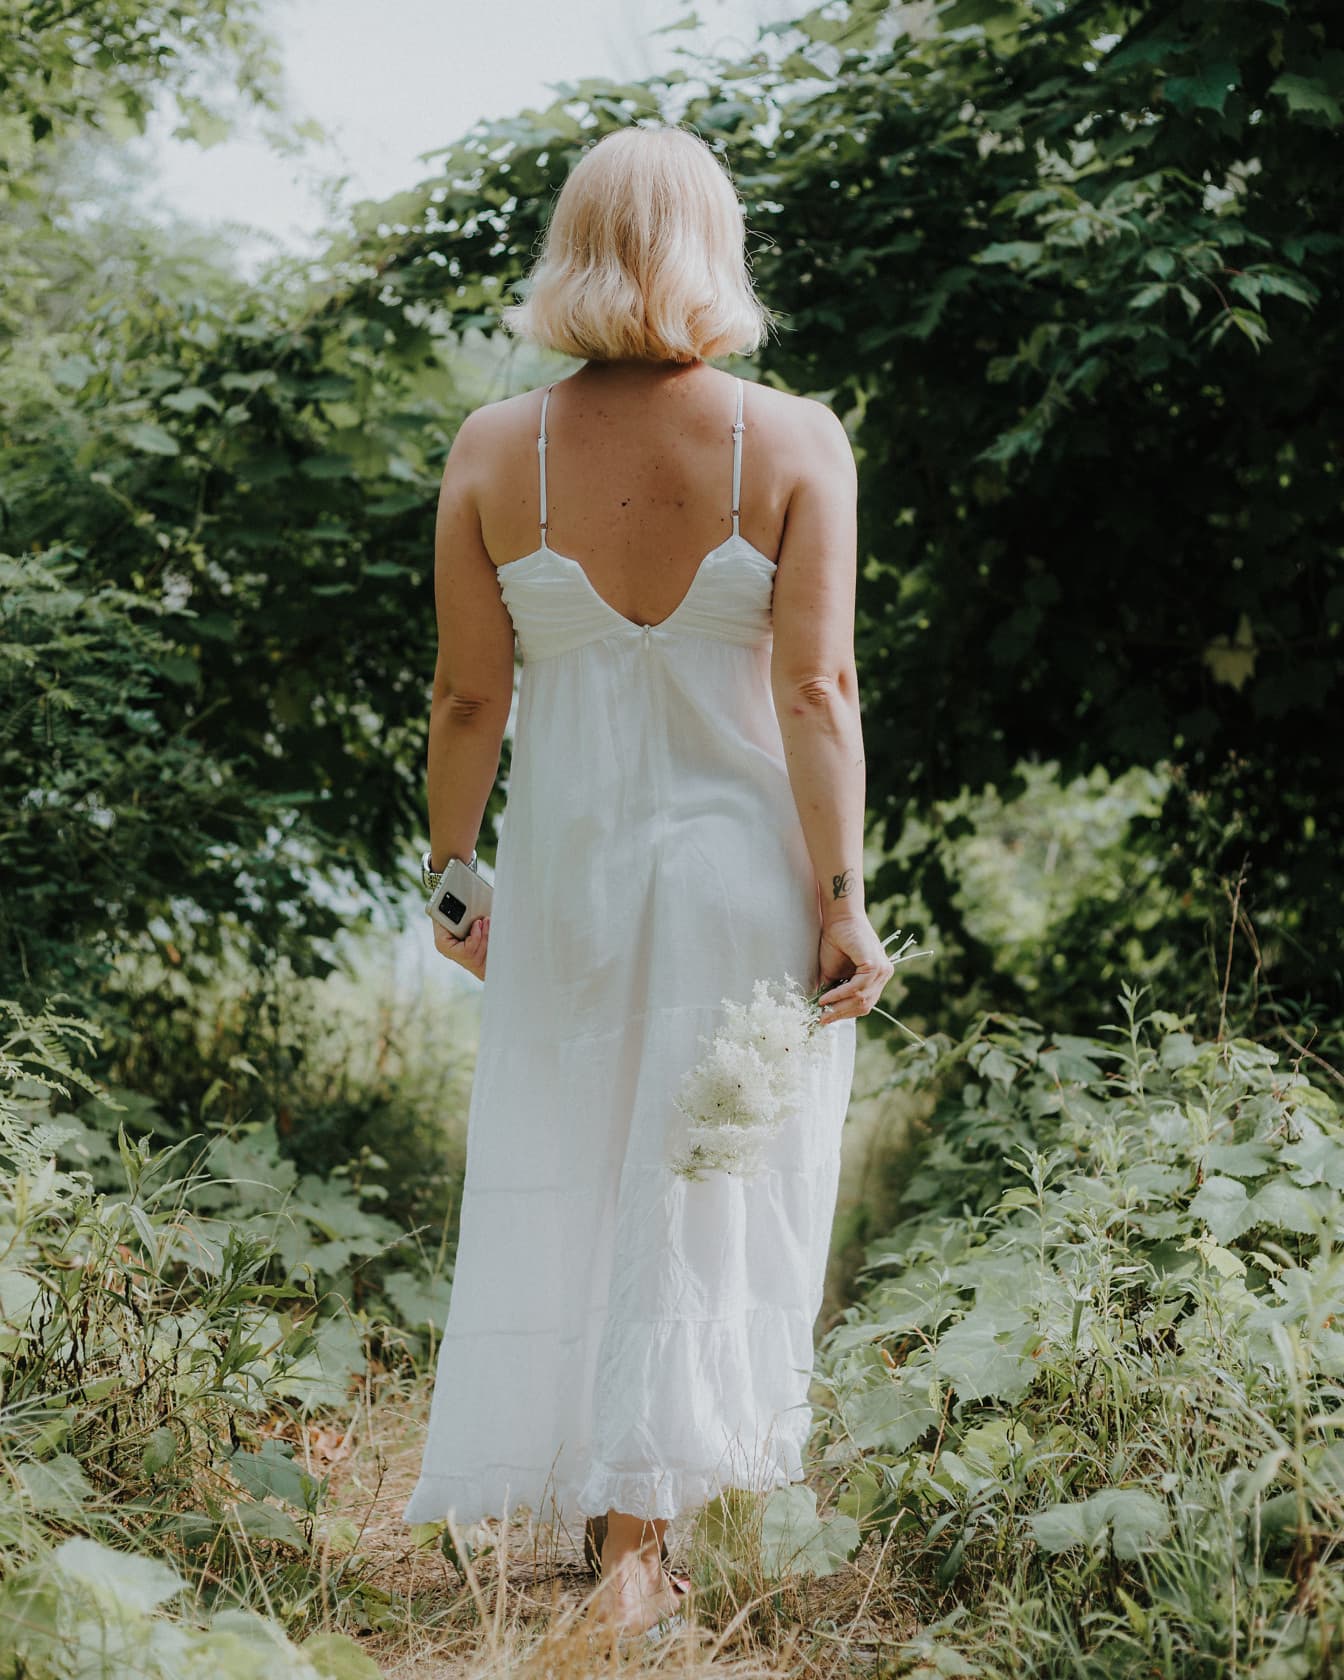 Elegant white cotton dress on young blonde walking in forest